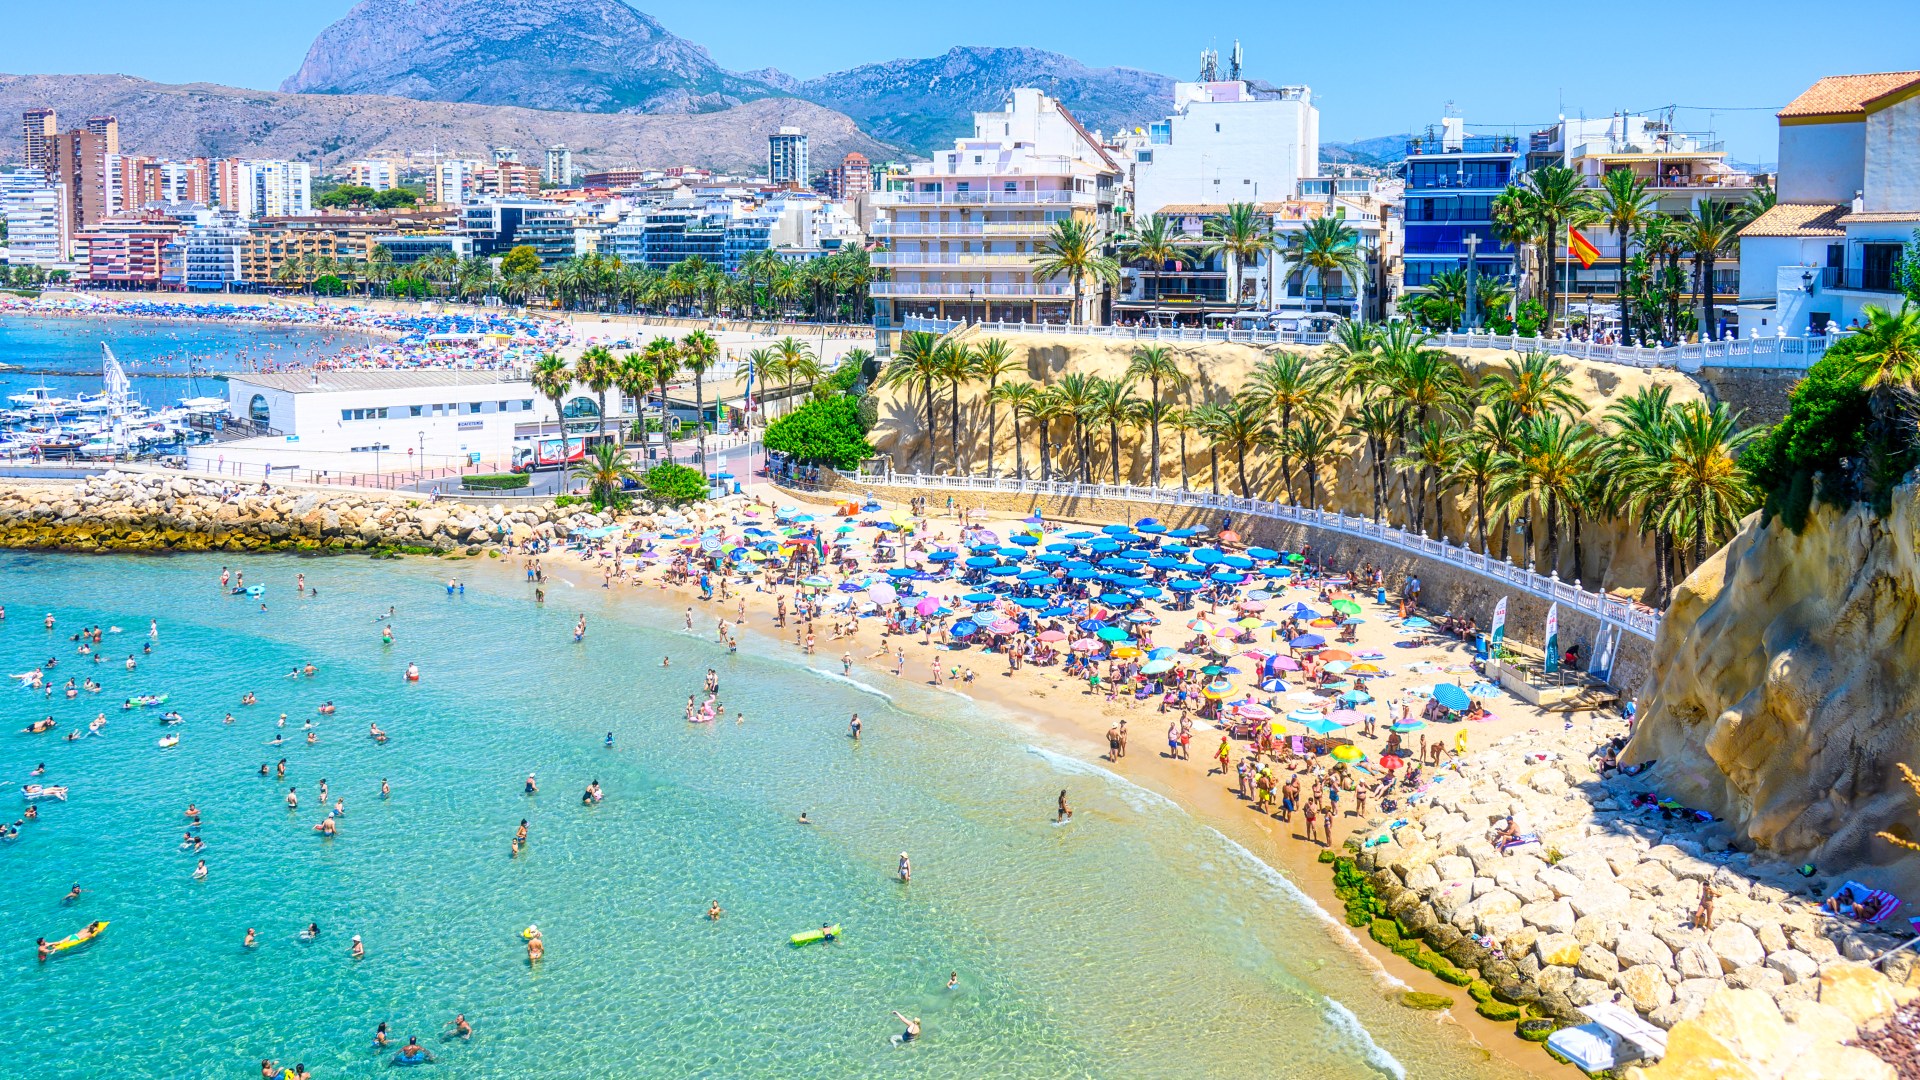 Shocking: Brit tourist gang-raped twice by three men in Benidorm after pub abduction